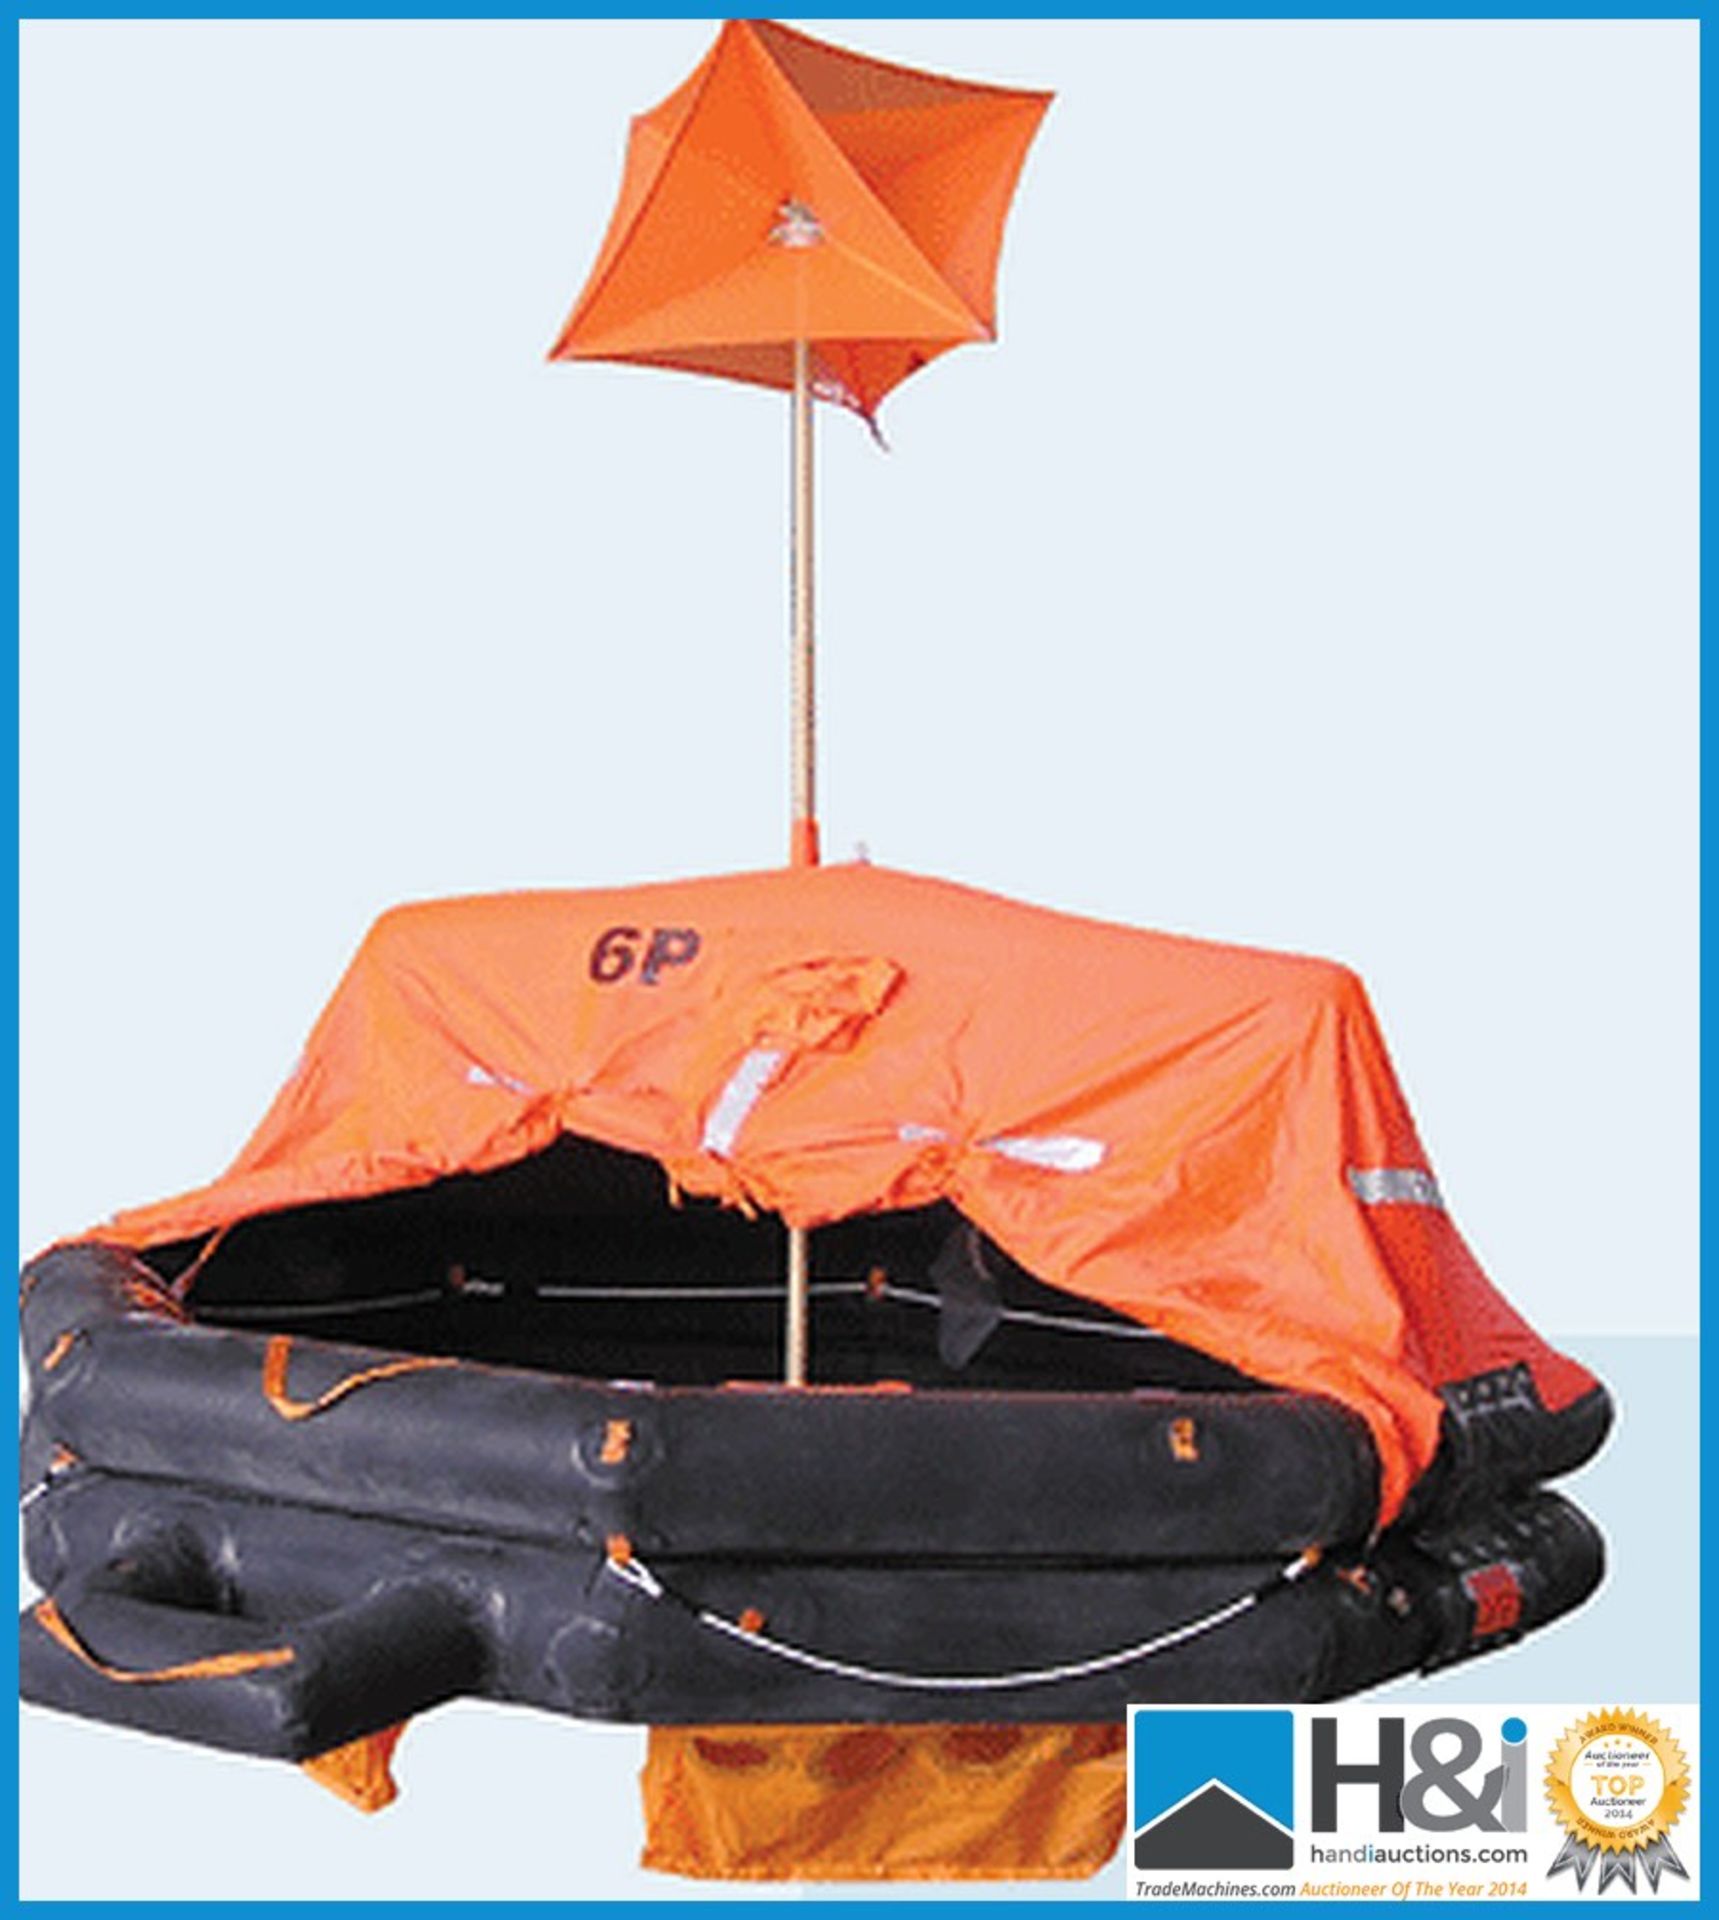 1 off ZHR-D25 davit launch 25 person capacity liferaft. Meets the requirements of (Regulations for